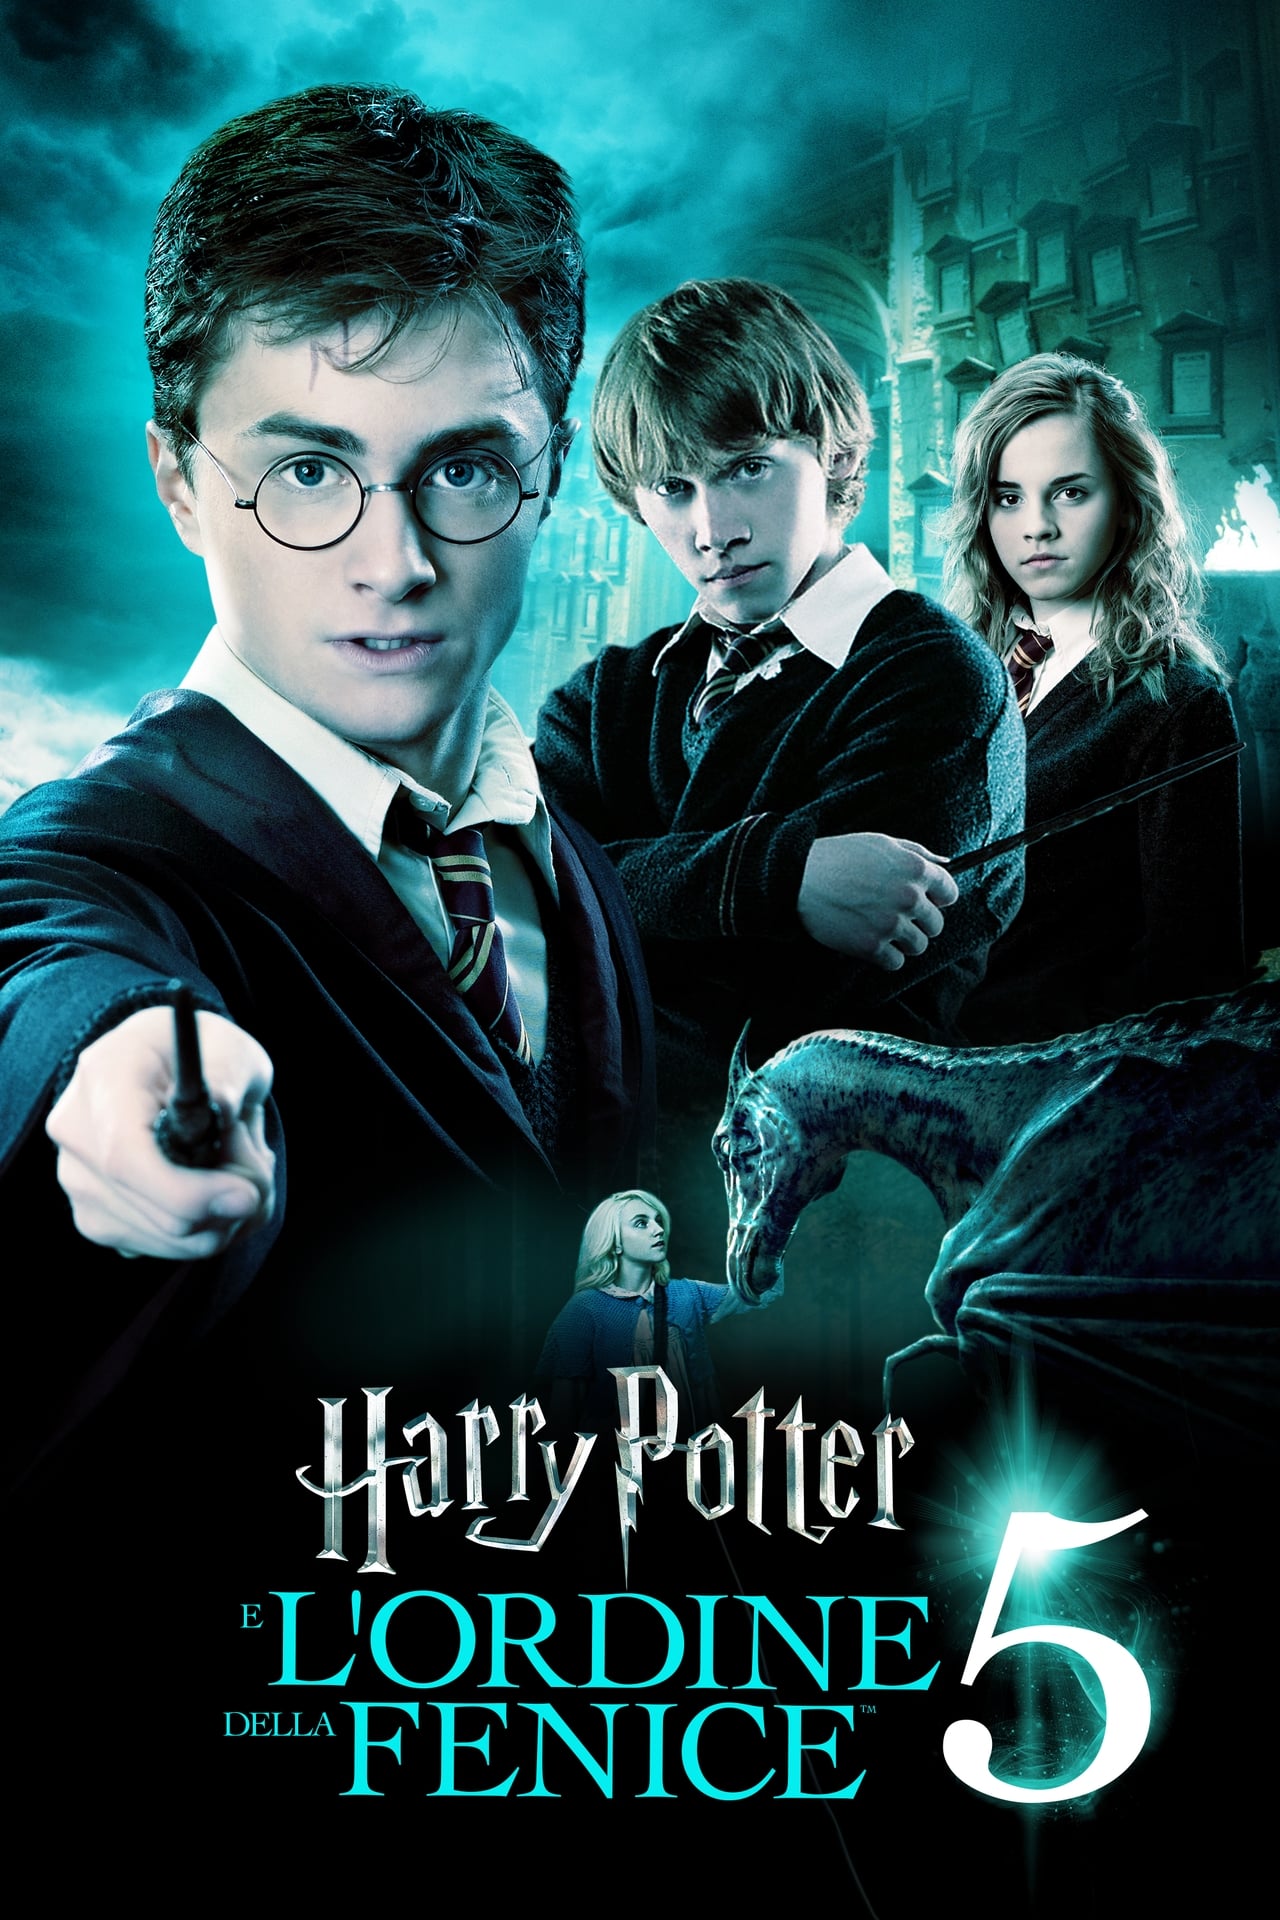 Watch Harry Potter And The Order Of The Phoenix Online Free